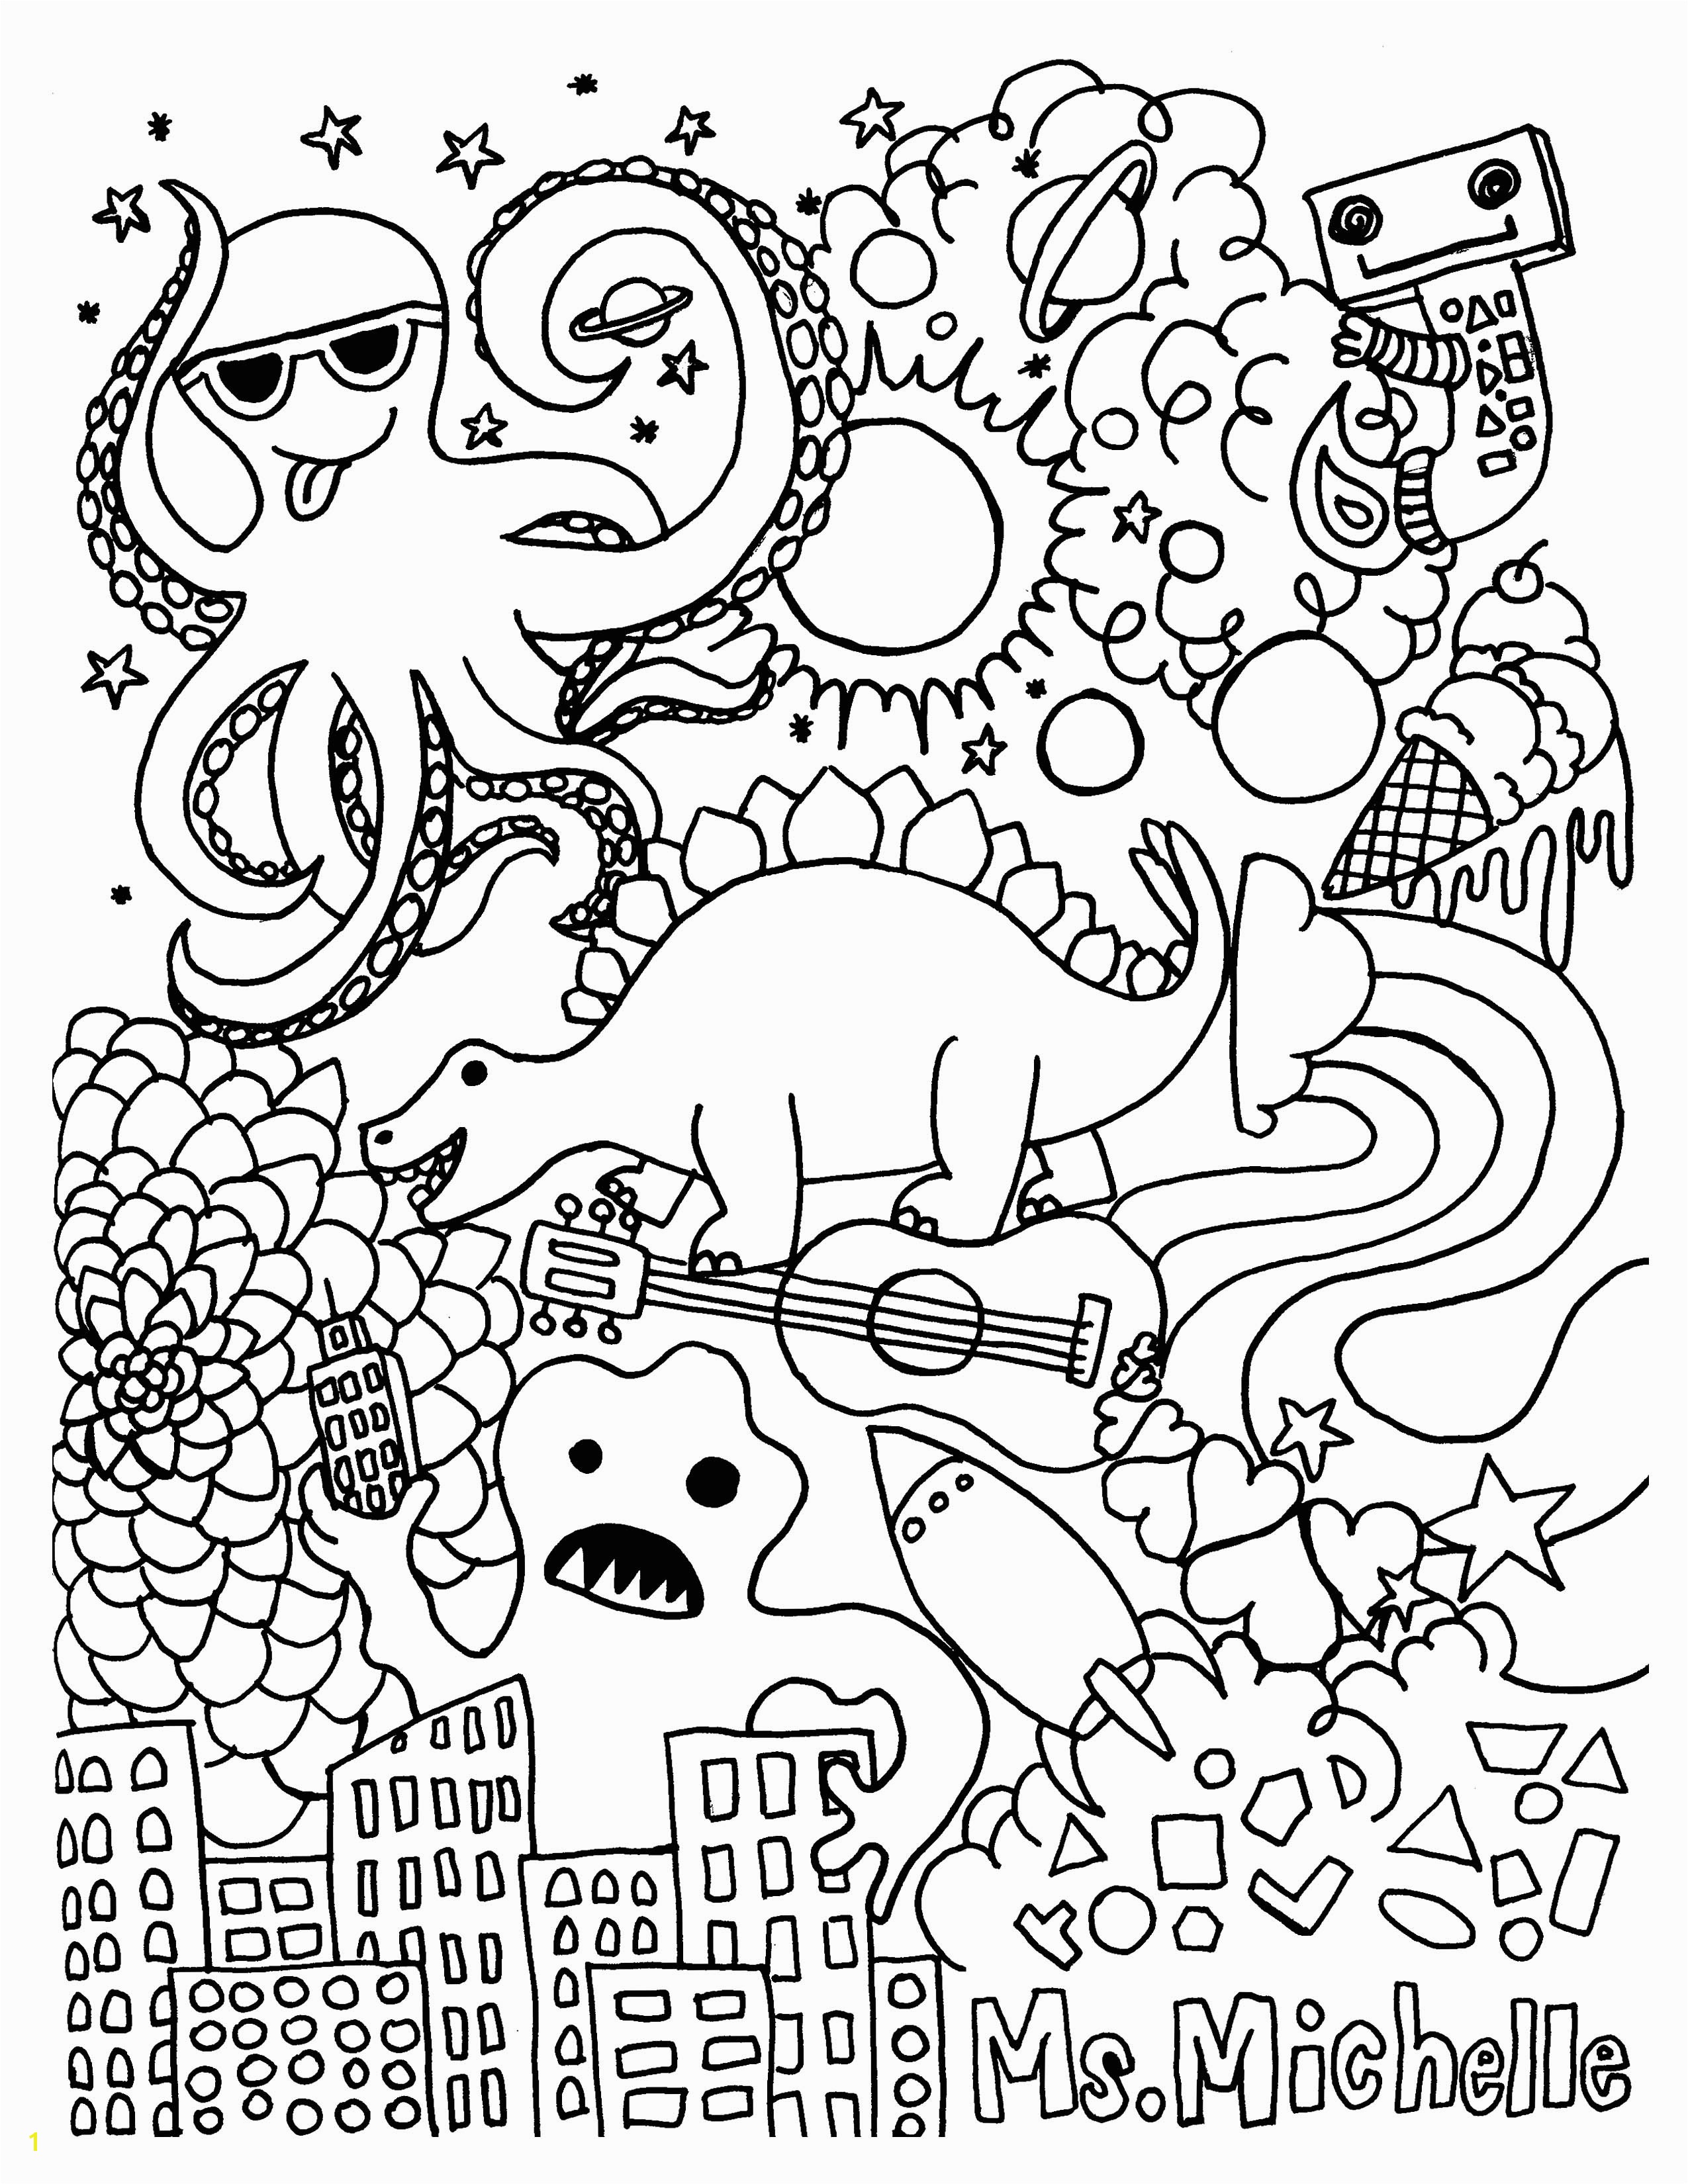 Free Coloring Pages for Boys Best Coloring Page for Adult Od Kids